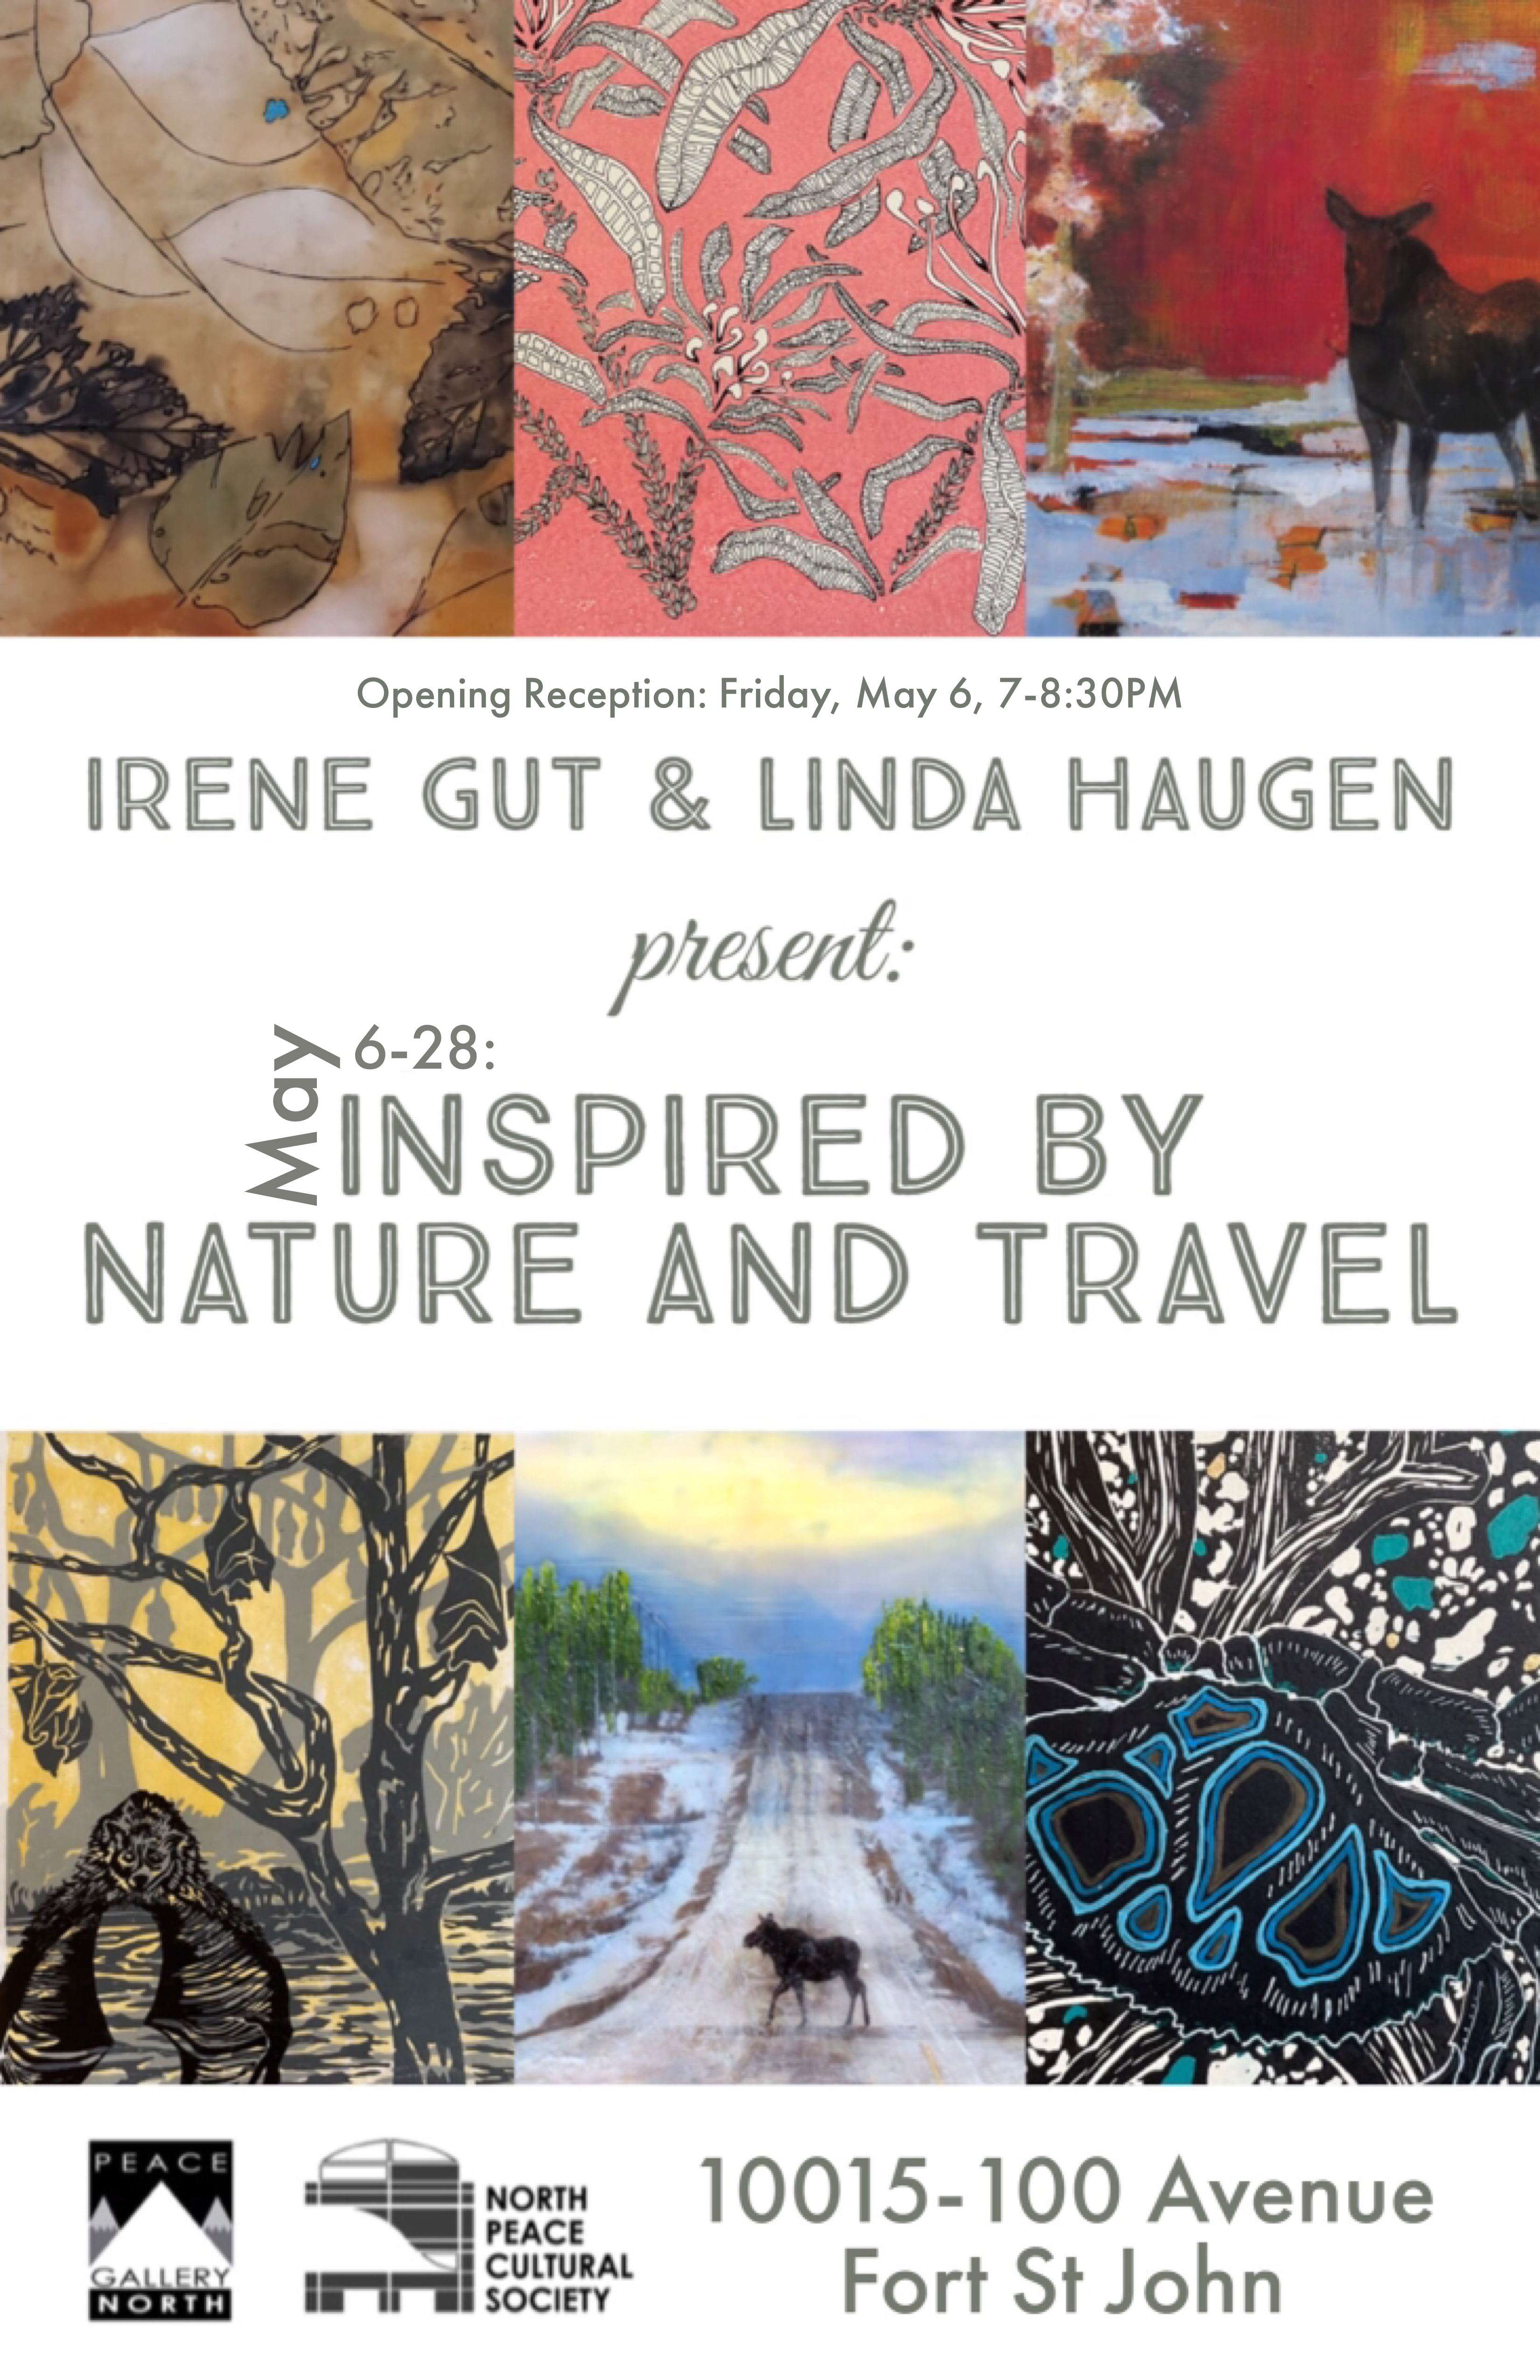 Inspired by Nature and Travel – Linda Haugen & Irene Gut